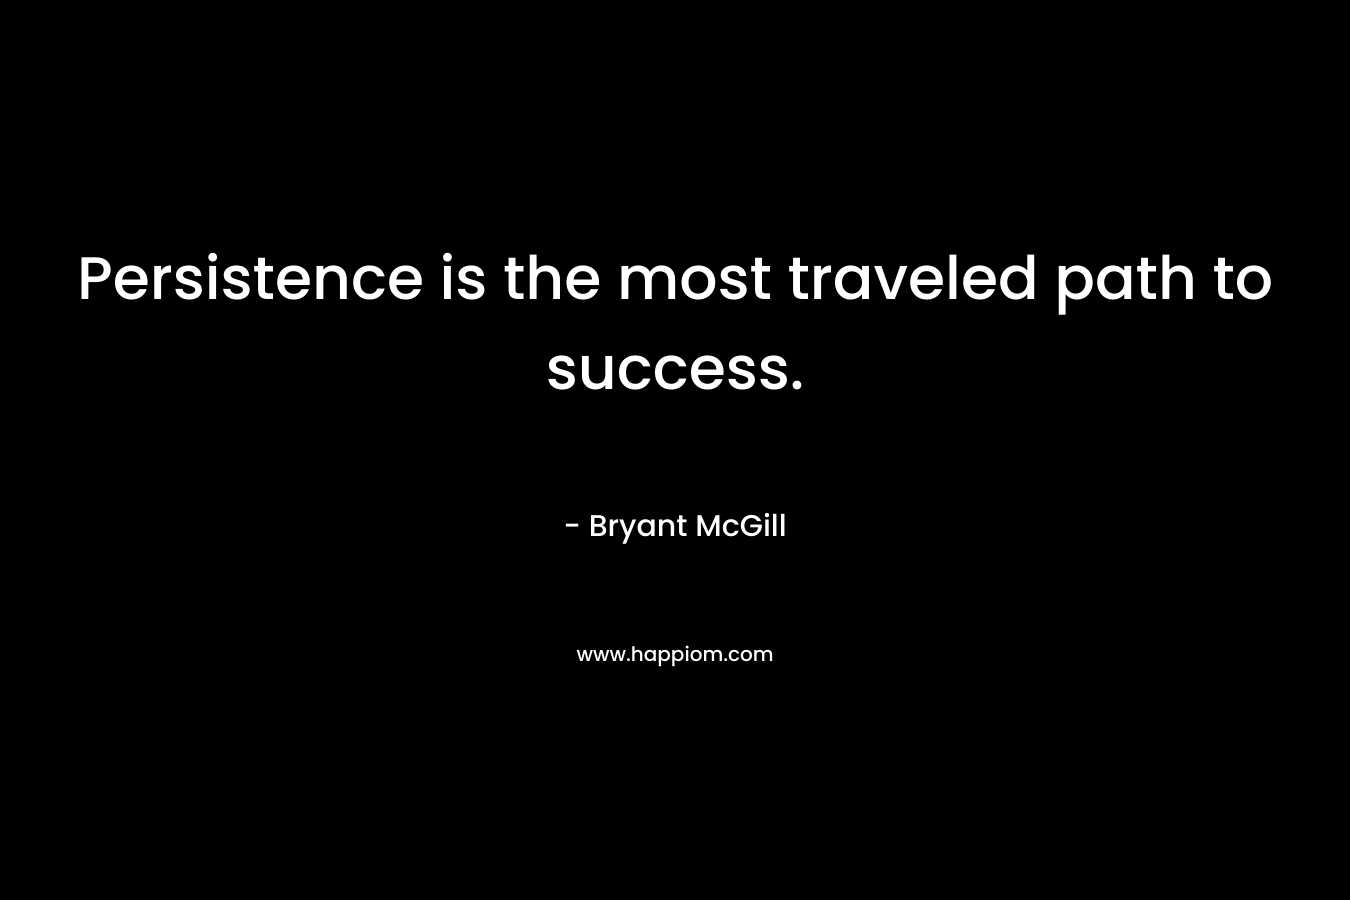 Persistence is the most traveled path to success. – Bryant McGill